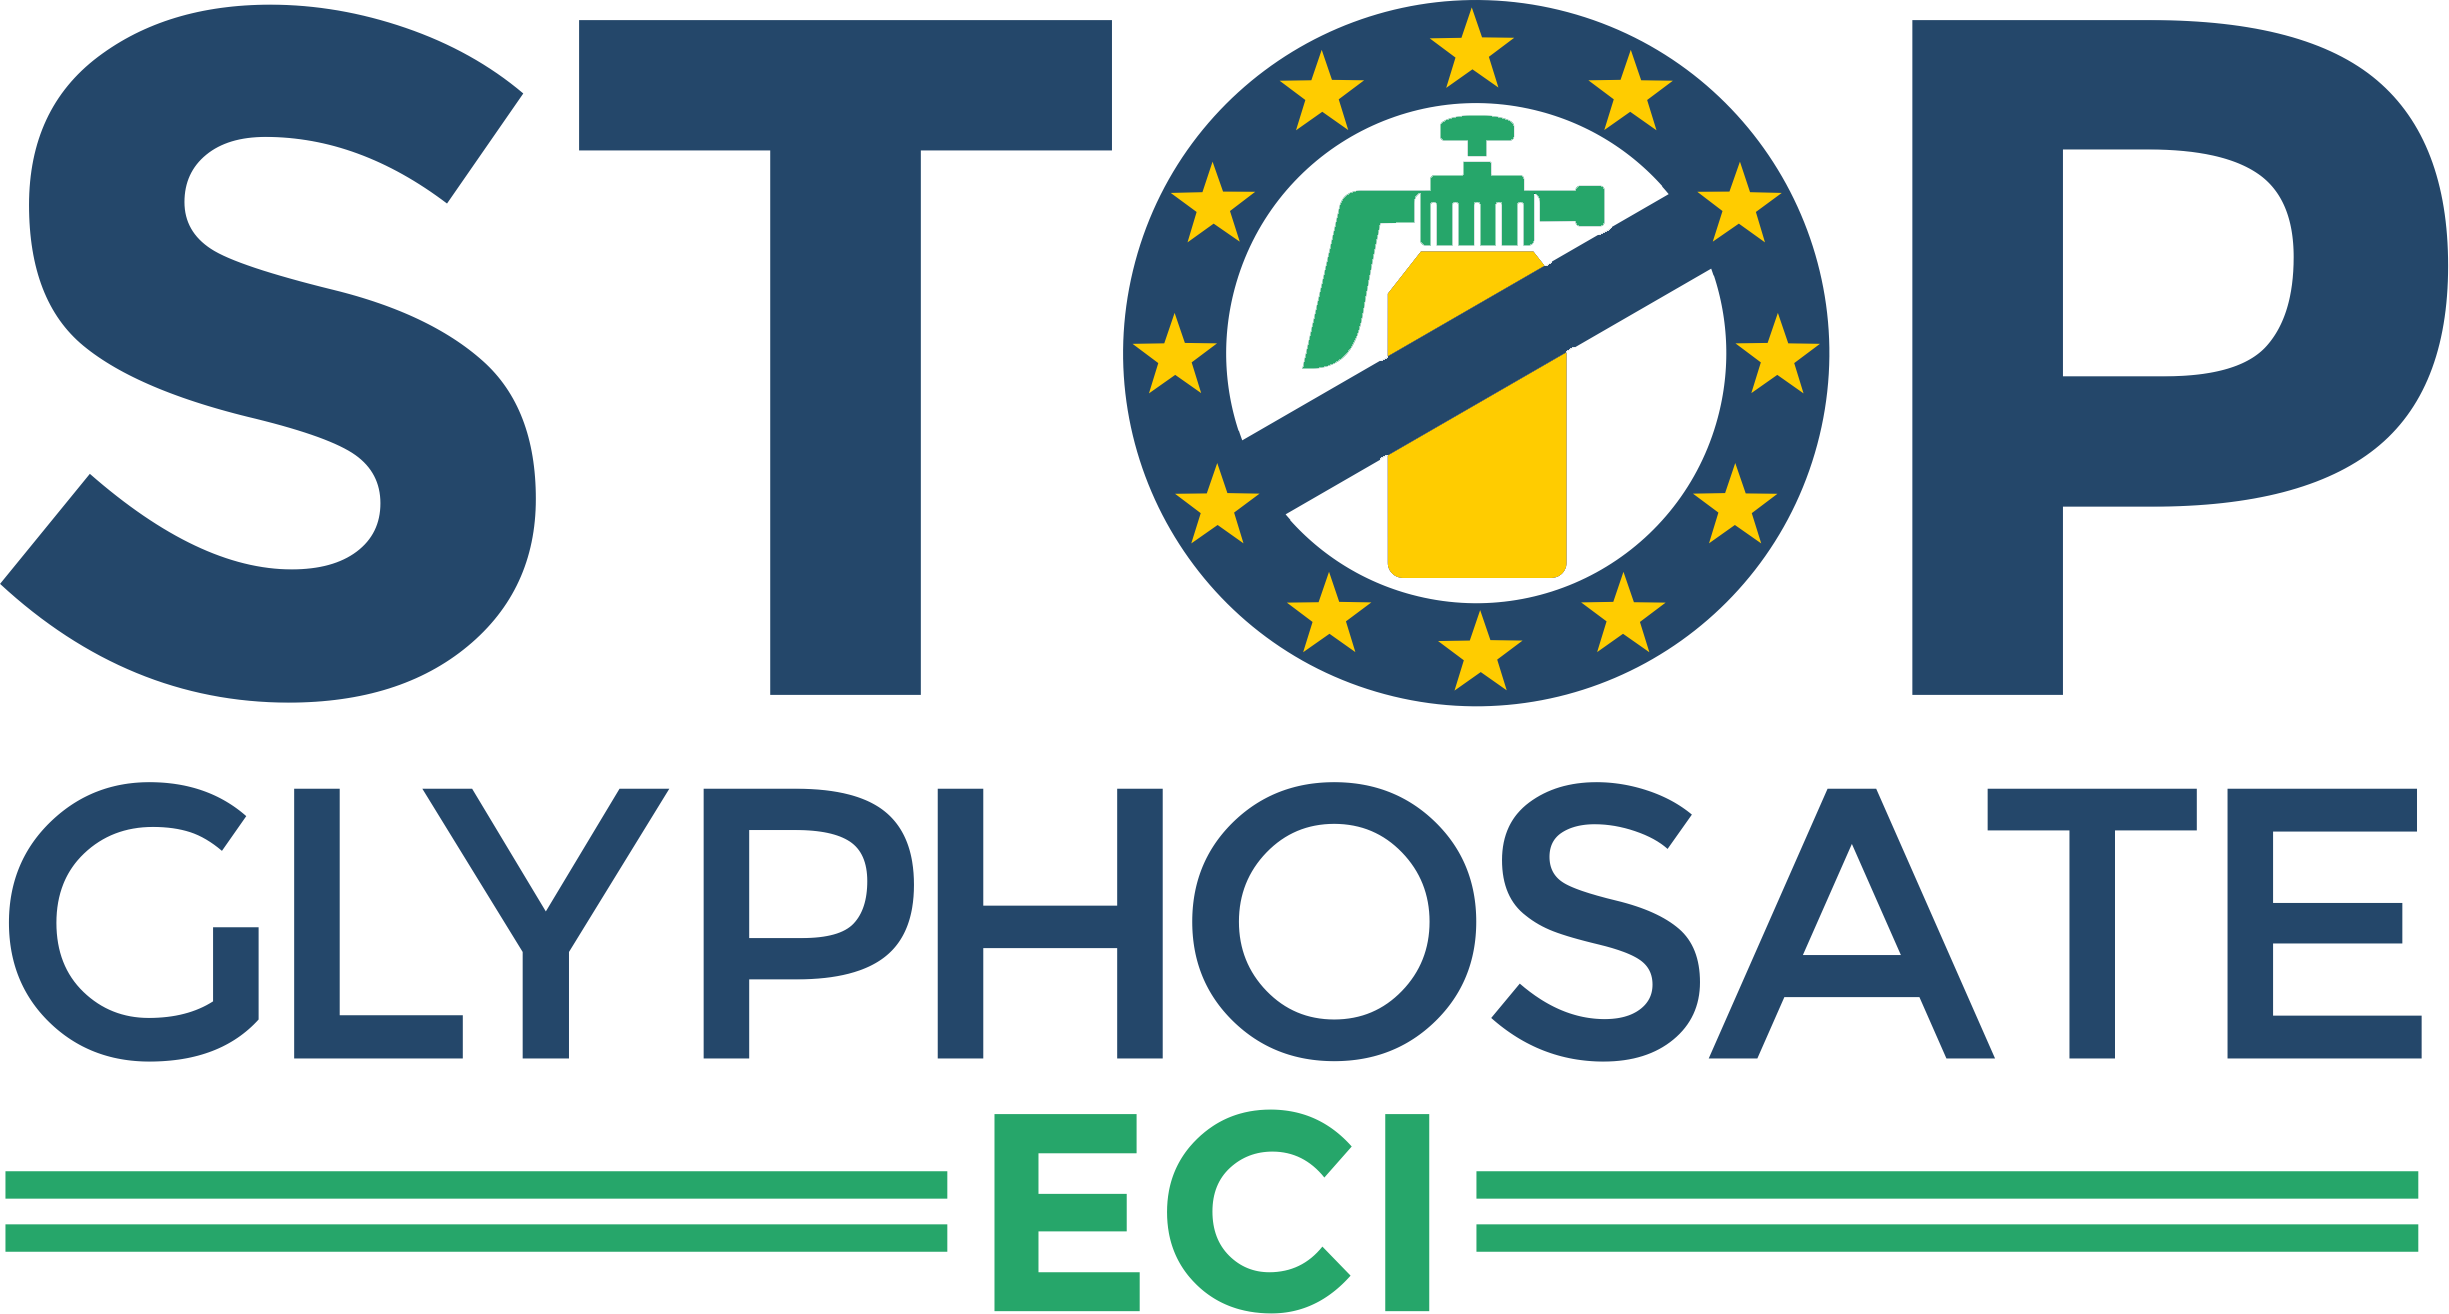 European Day of Action to Stop Glyphosate